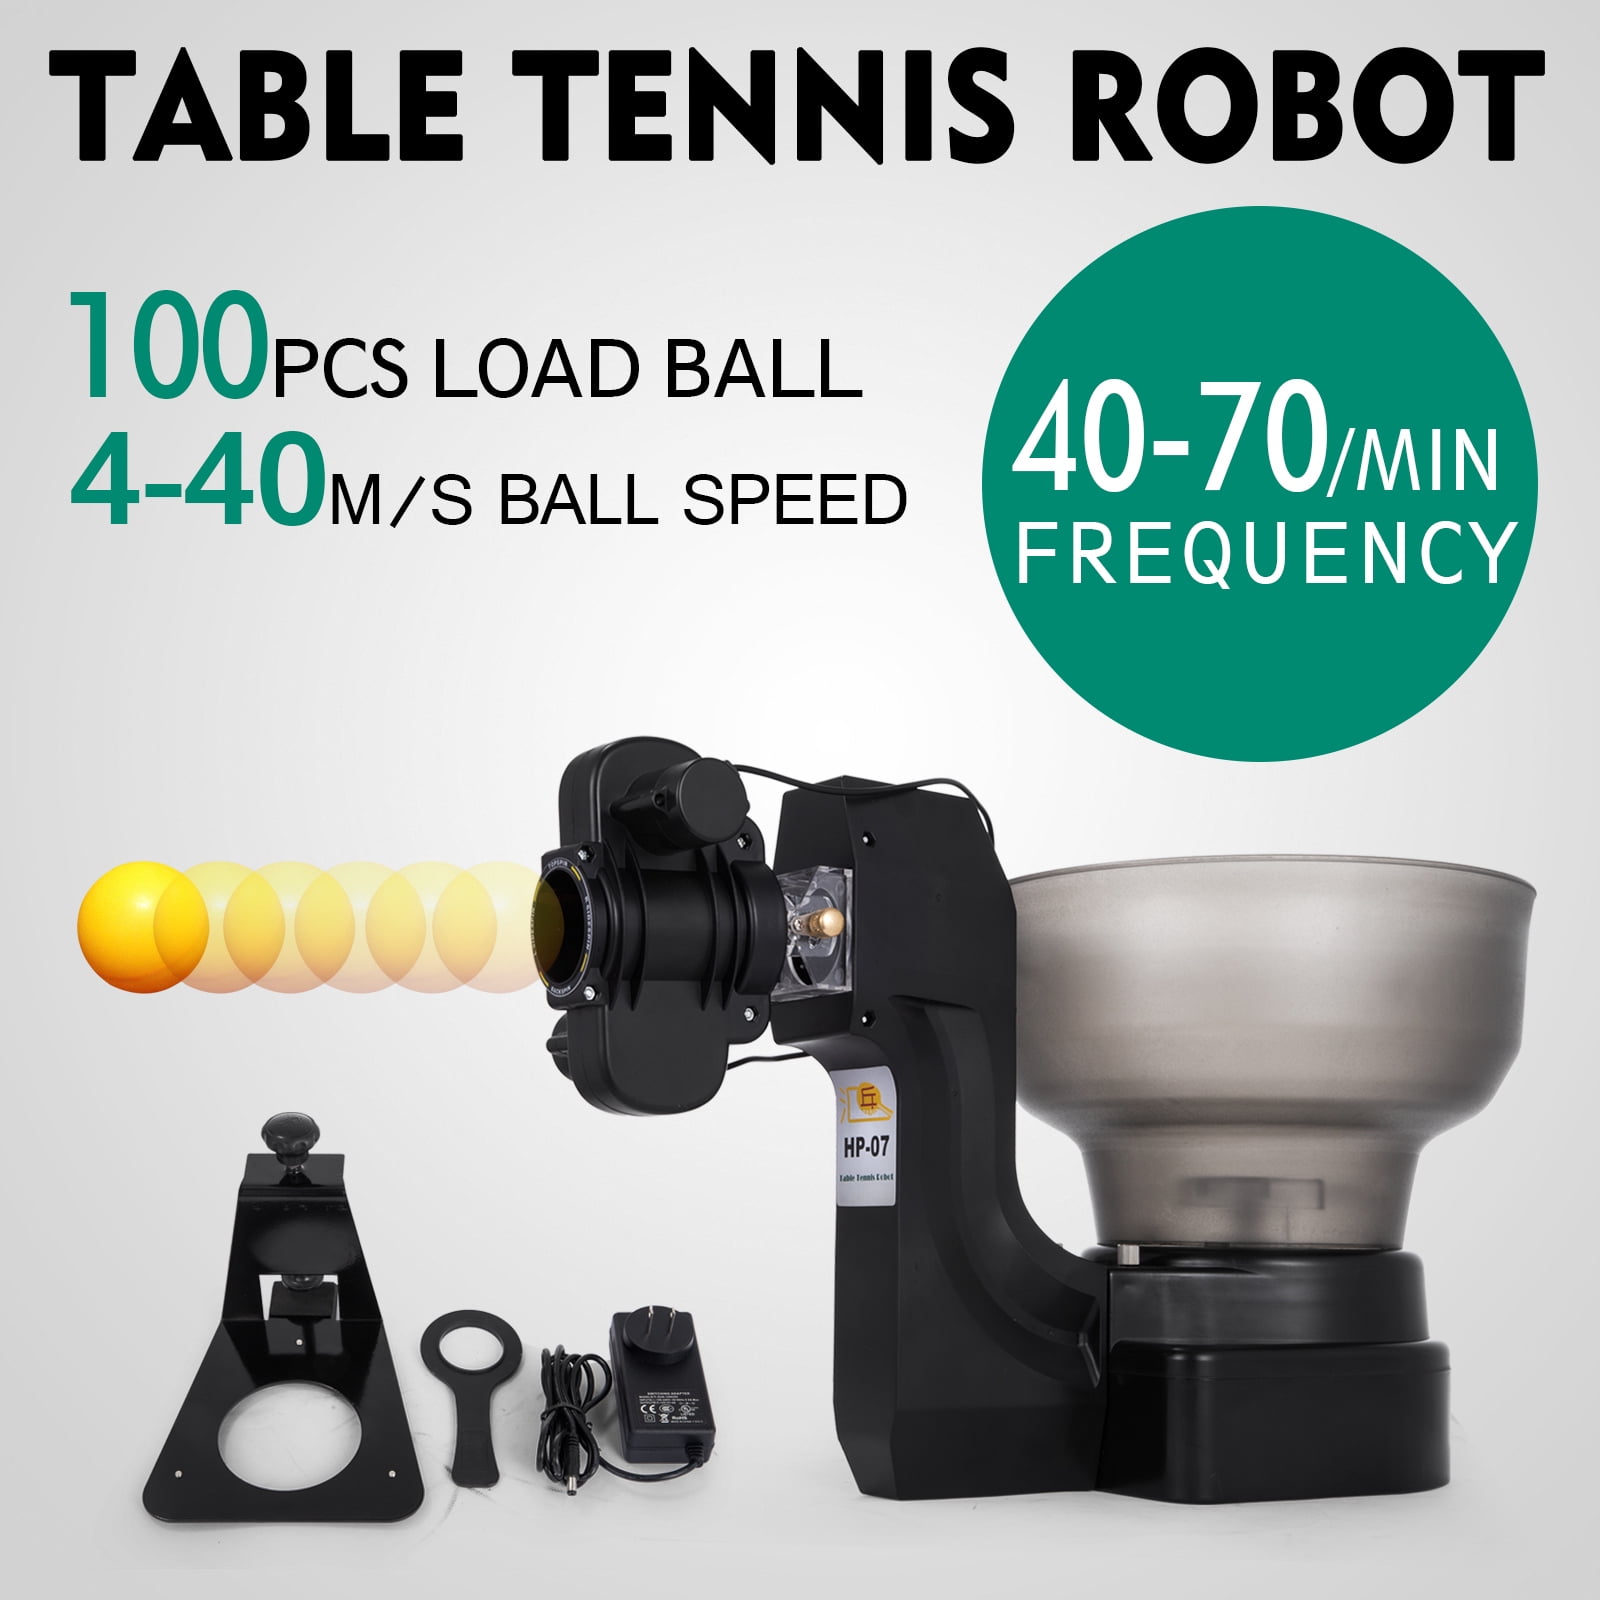 HP-07 Ping Pong Table Tennis Robot Automatic Ball Machine for Training Exercise 